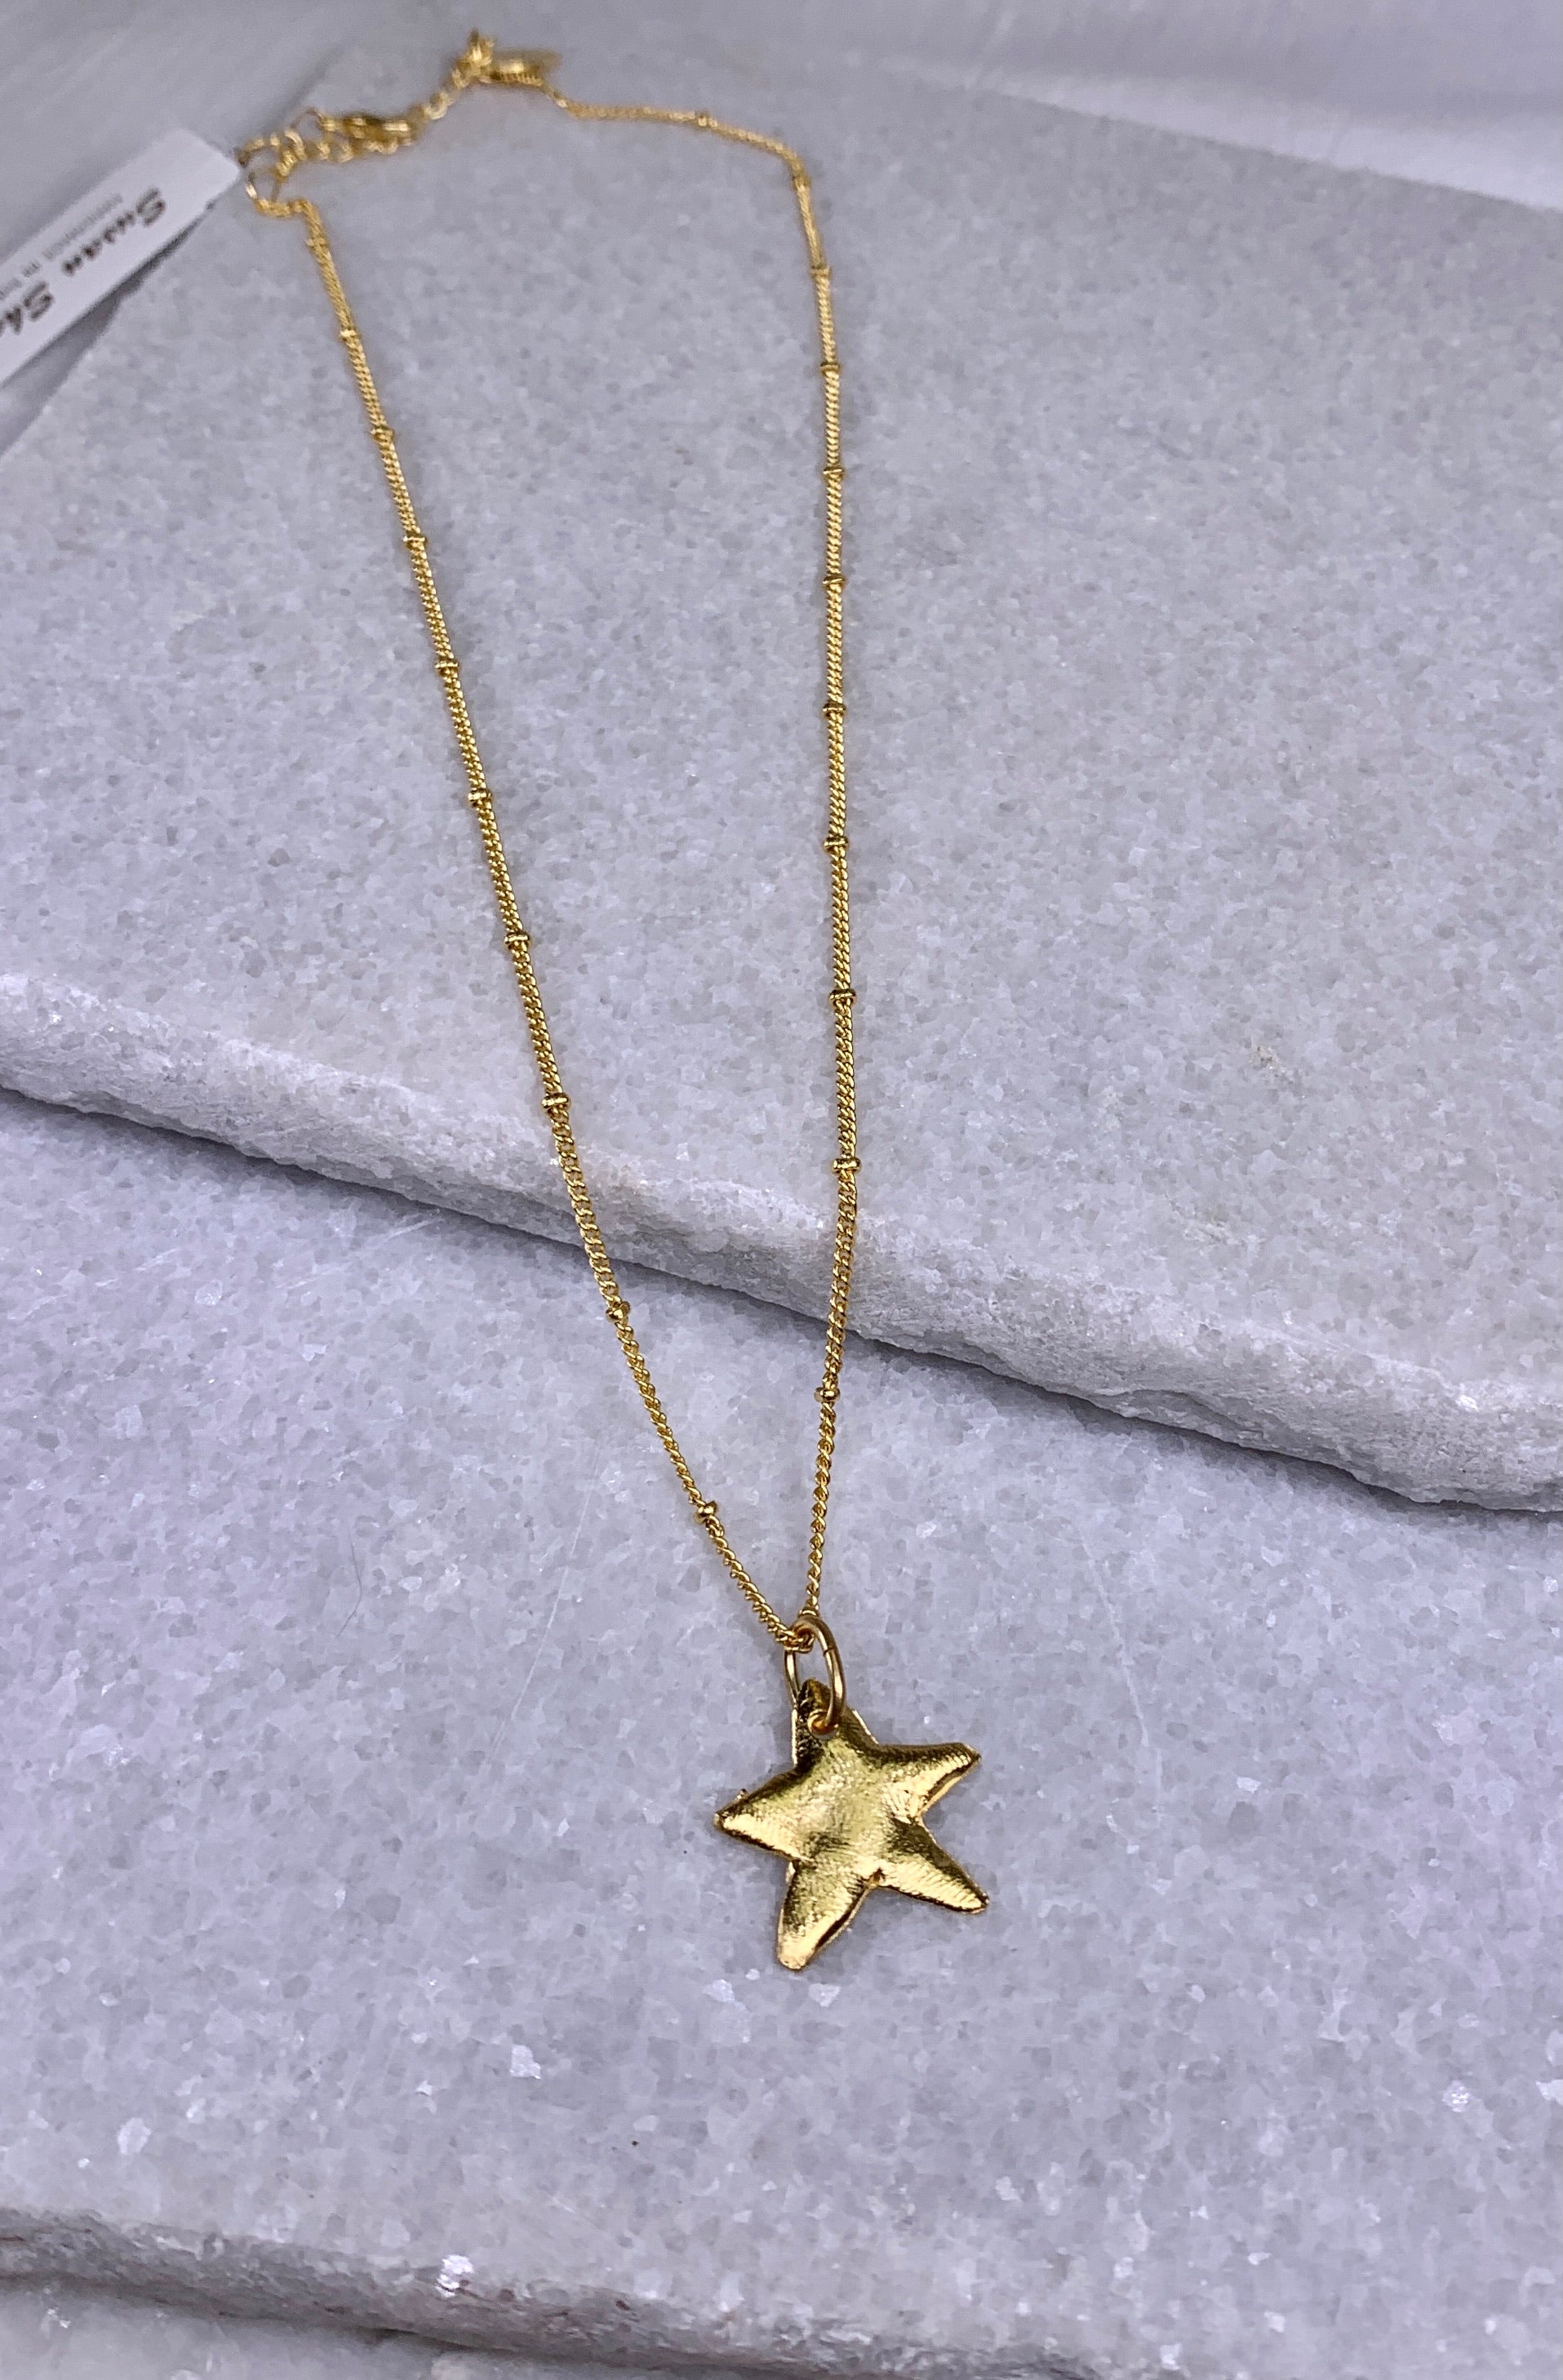 Susan Shaw Dainty Gold Star Necklace.